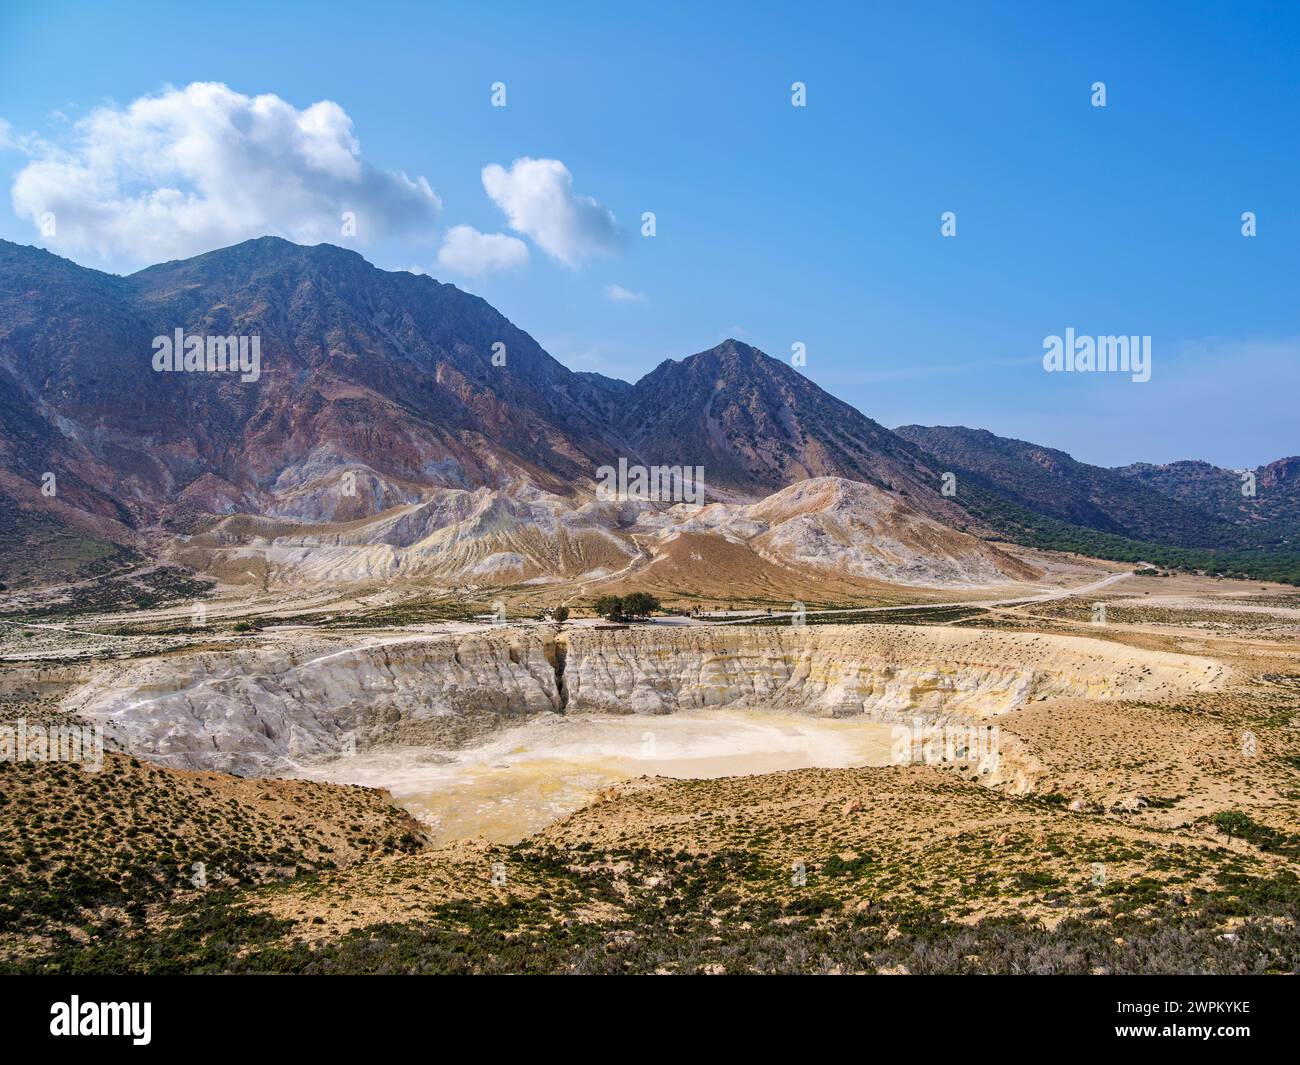 Stefanos Volcano Crater, elevated view, Nisyros Island, Dodecanese, Greek Islands, Greece, Europe Stock Photo